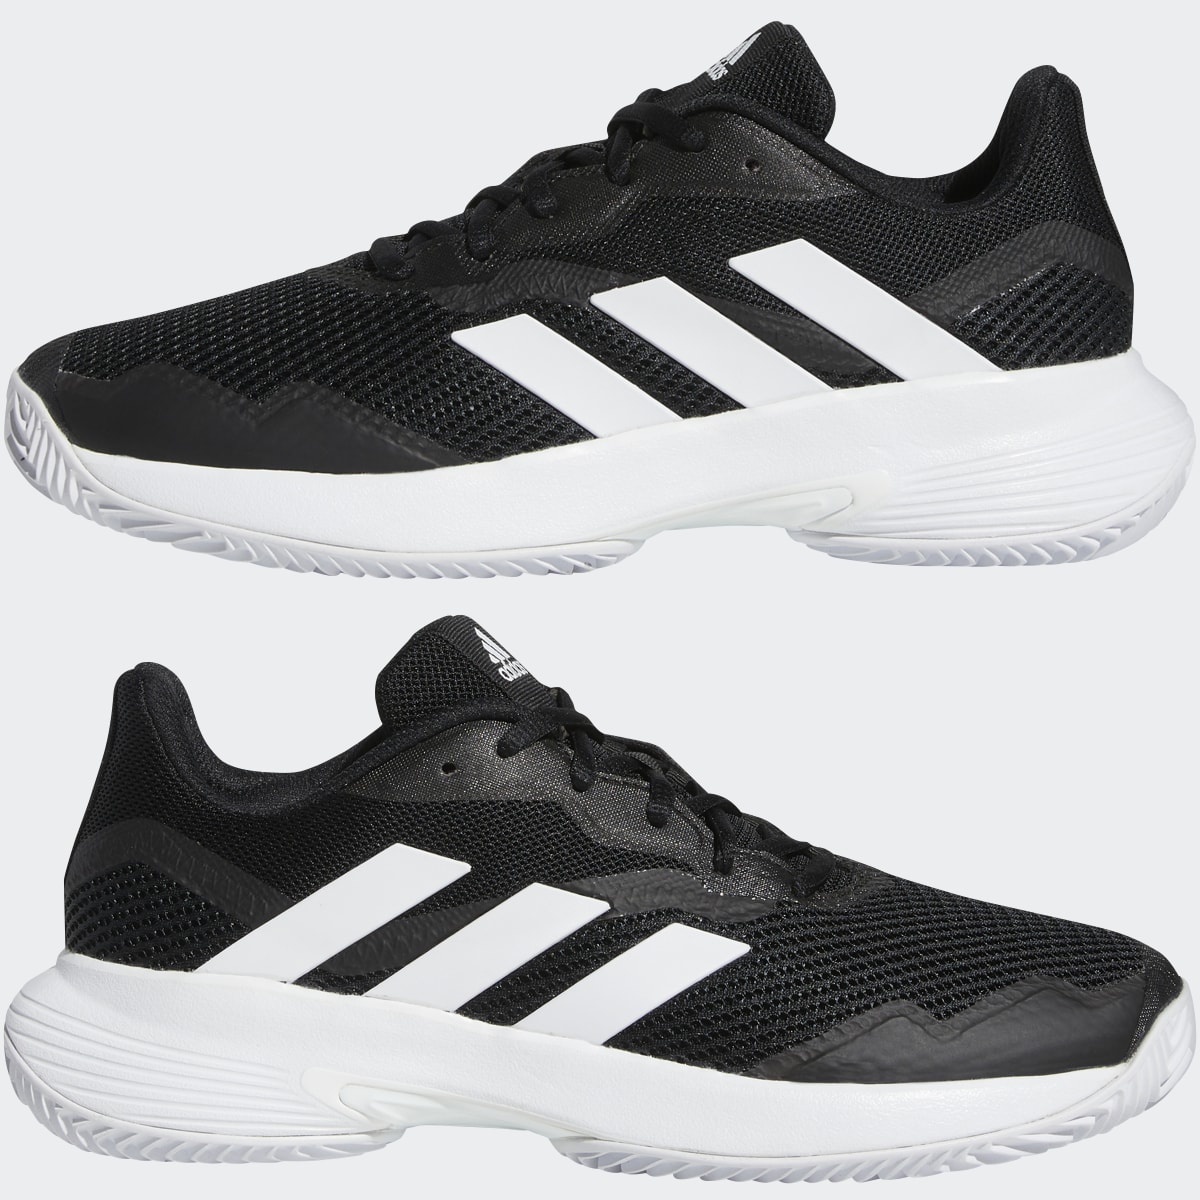 Adidas CourtJam Control Clay Tennis Shoes. 8